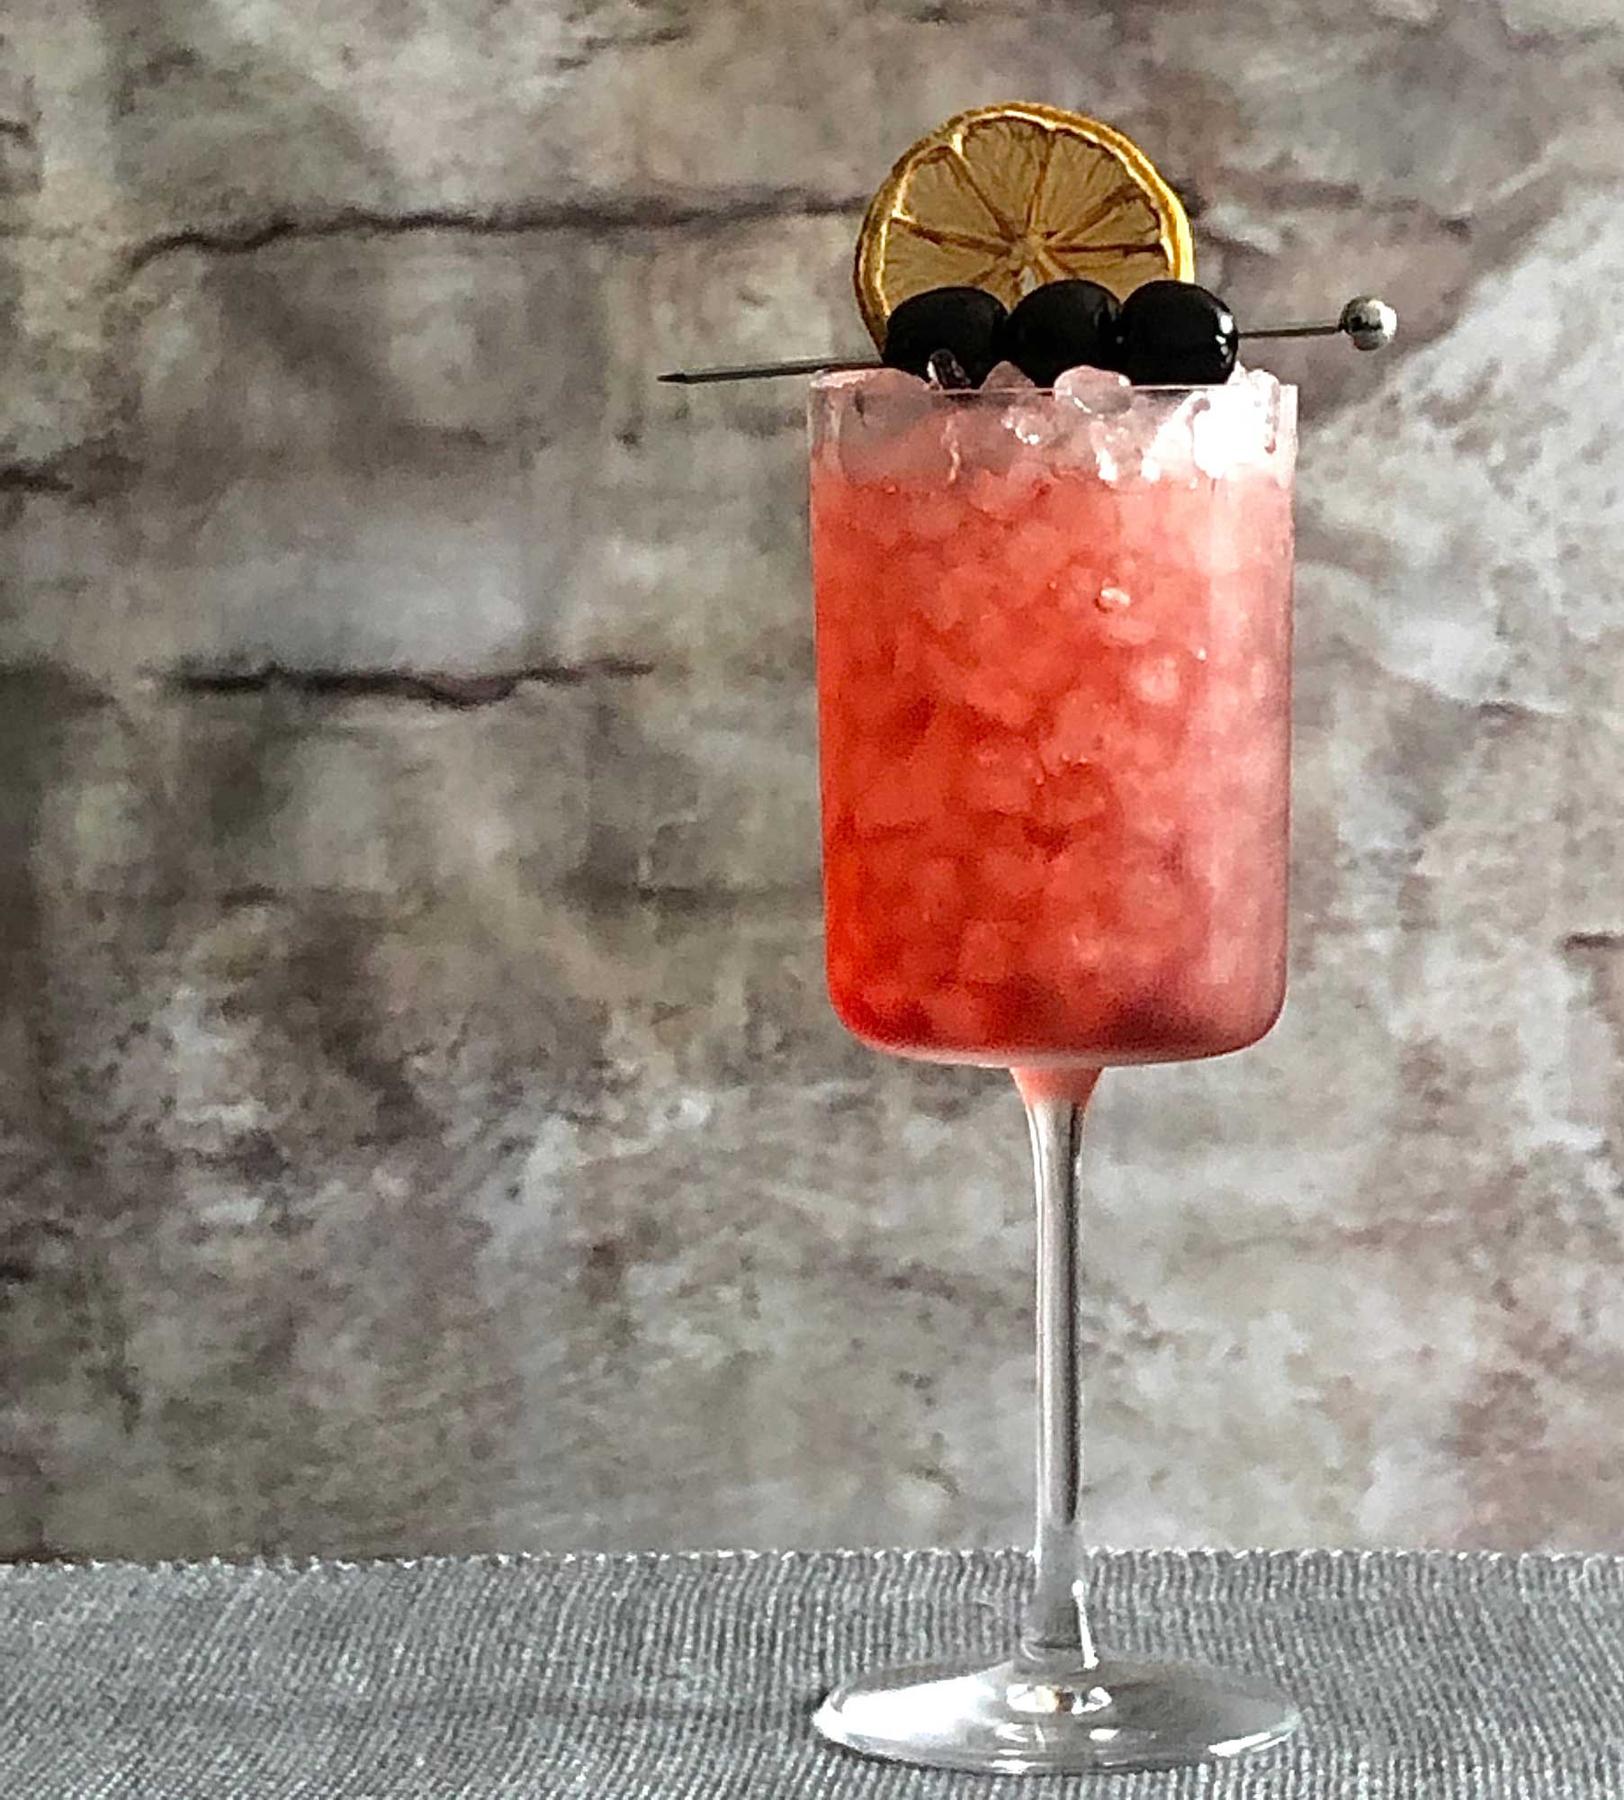 An example of the Cocconato Jubilee, the mixed drink (drink) featuring Cocchi Americano Rosa, soda water, cherry syrup, lemon twist, and maraschino cherry; photo by Lee Edwards